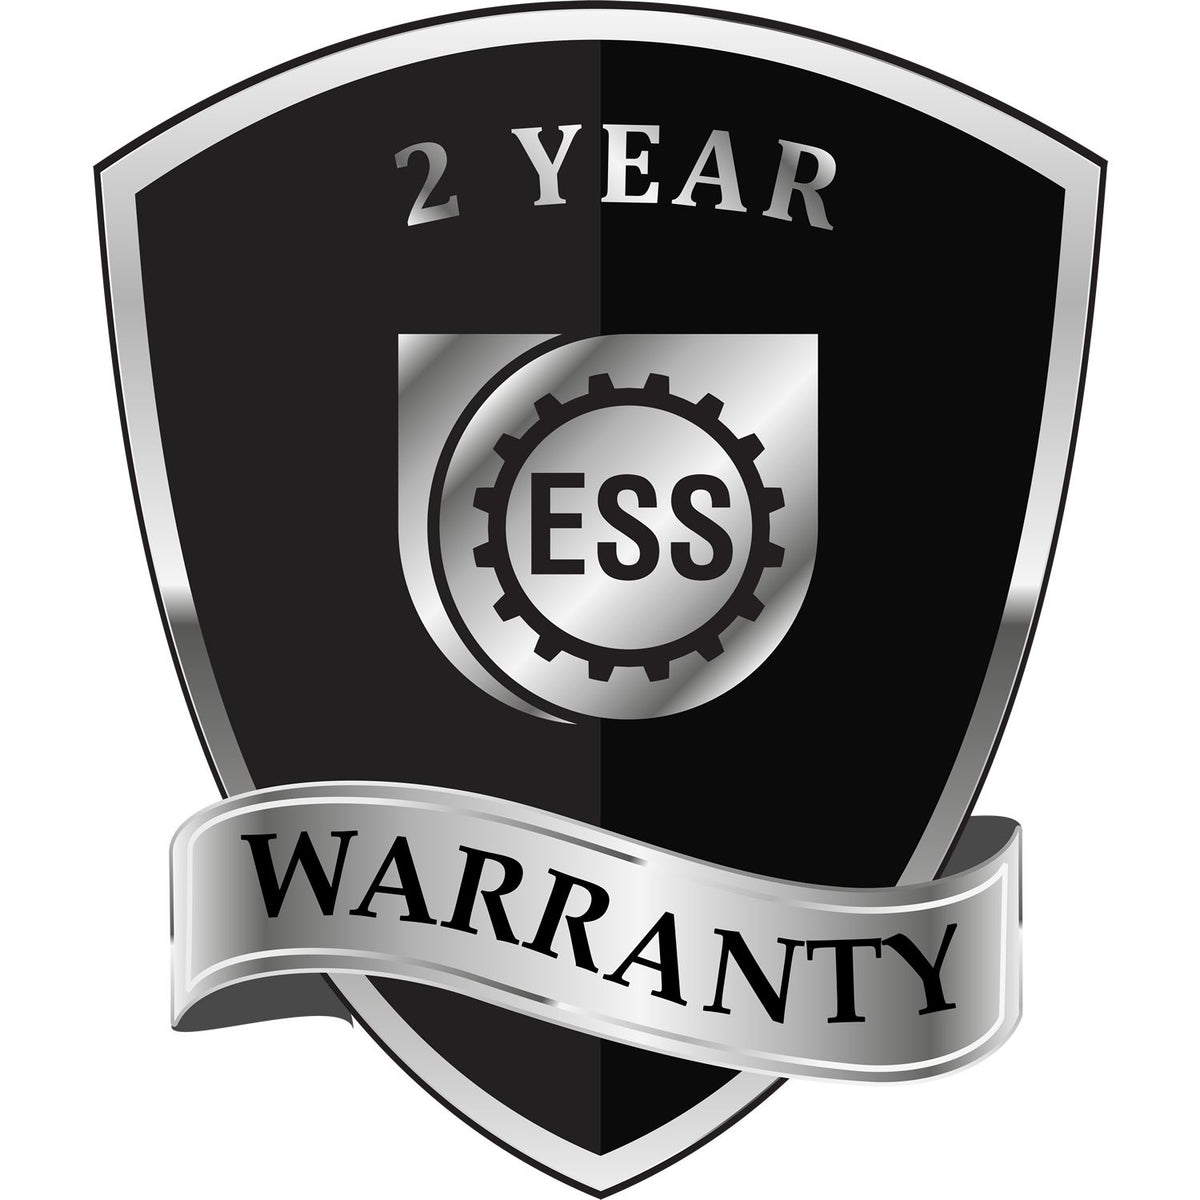 A black and silver badge or emblem showing warranty information for the Soft Colorado Professional Geologist Seal